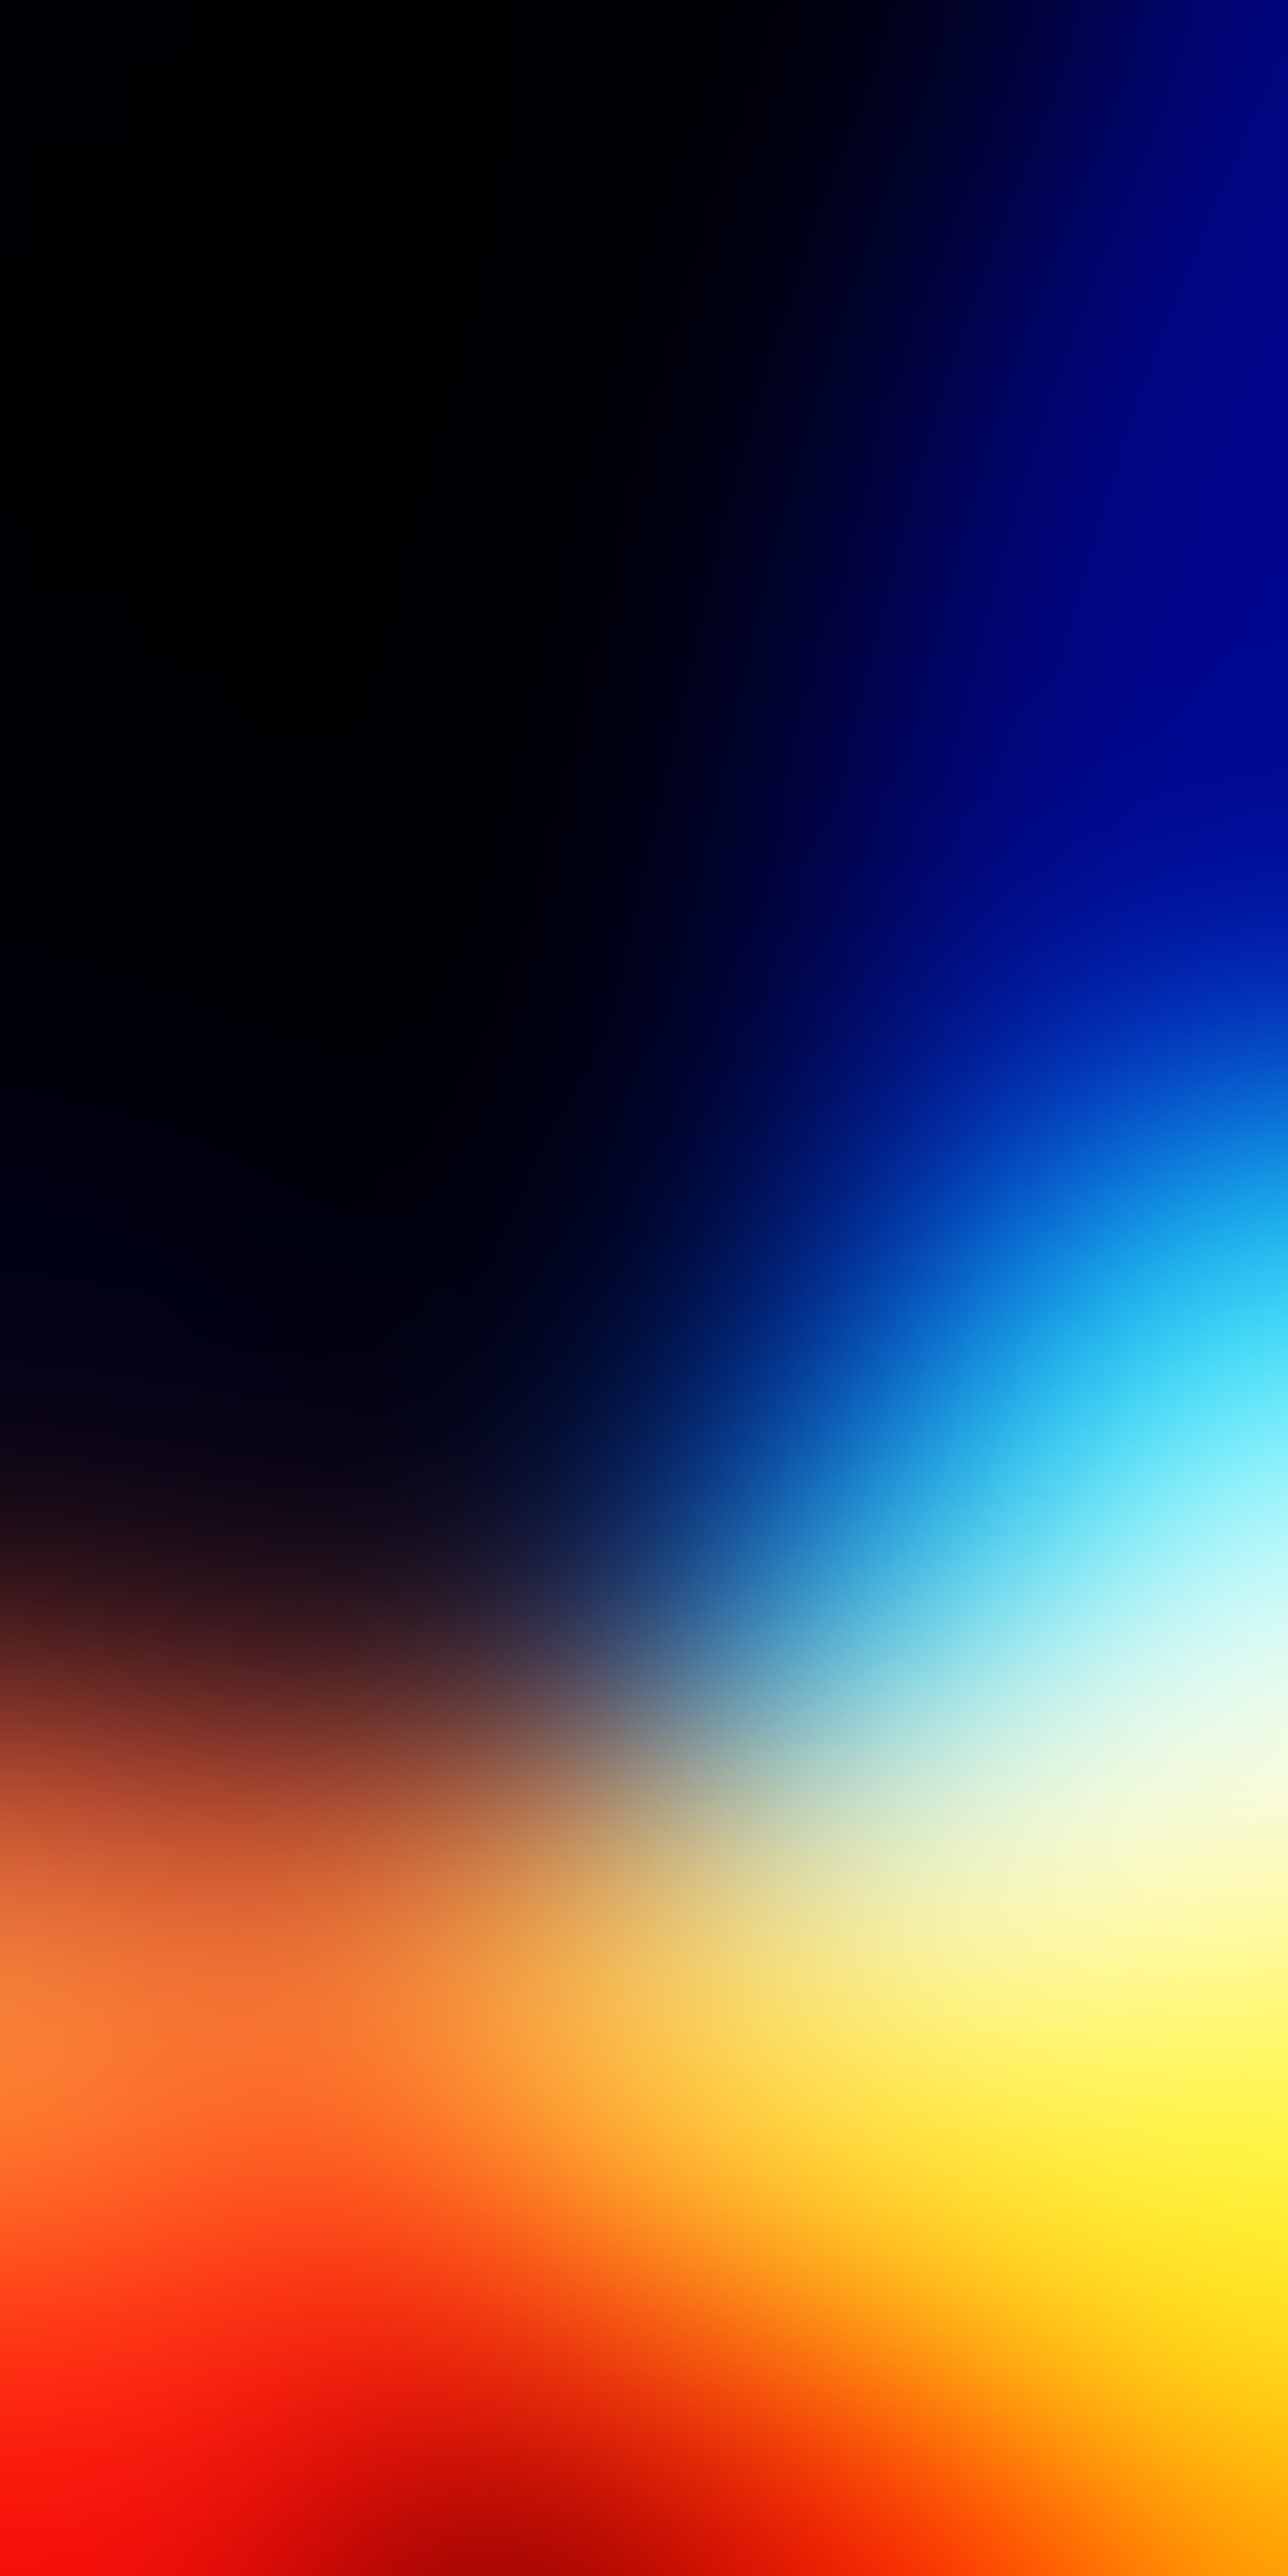 Dark To Colorful Gradient By Ongliong11 On iPhone